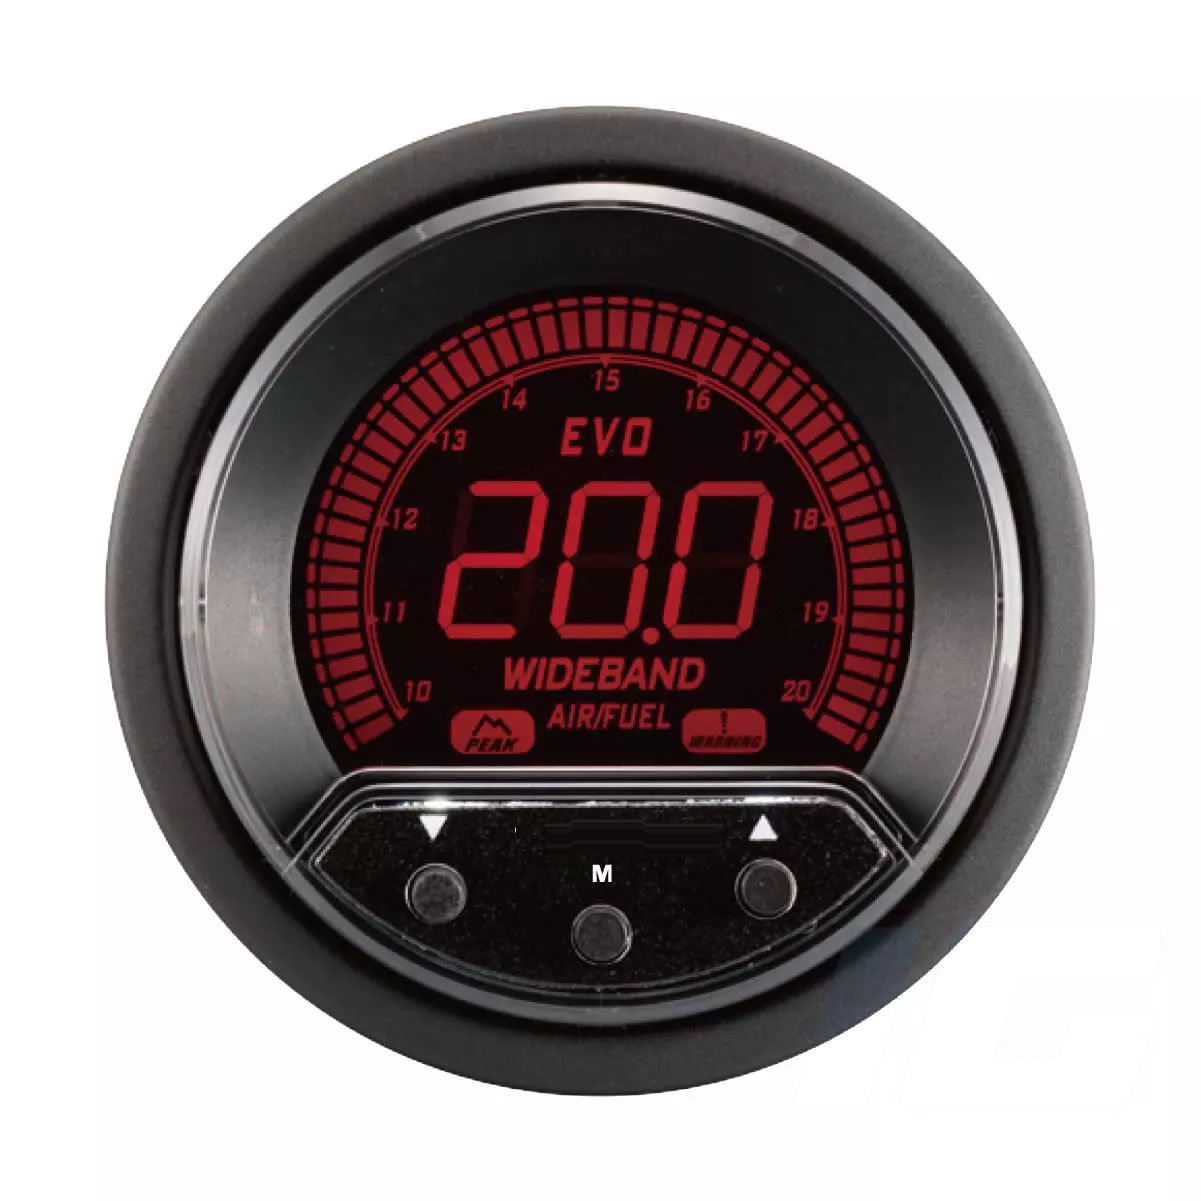 52mm LCD Performance Car Gauges - Wideband Air or Fuel Ratio Gauge With Sensor and Warning and Peak For Your Sport Racing Car